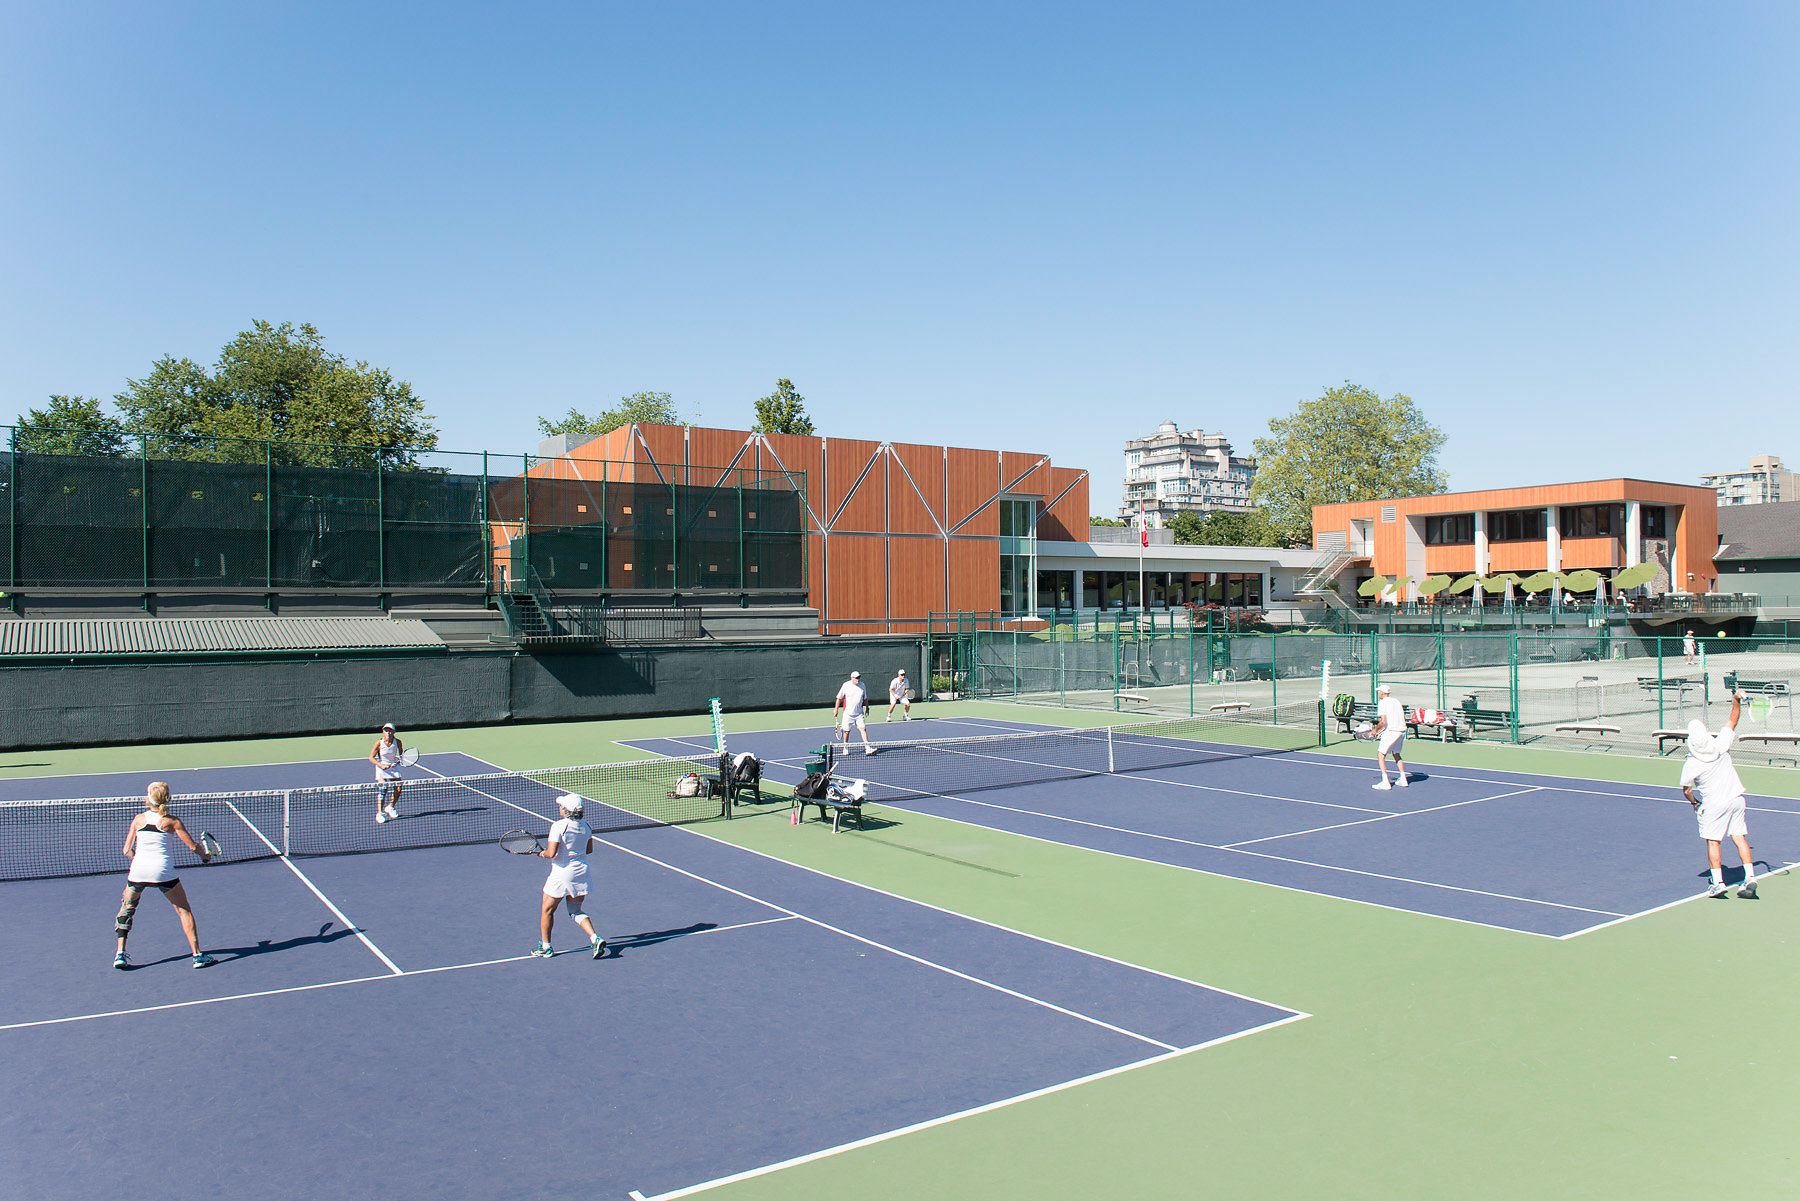 Players hit on the court at the Vancovuer Lawn Tennis and Badminton Club. It hosted an ITF Masters event in April, while Robert Oleksiuk and Gilbert White won ITF titles abroad.